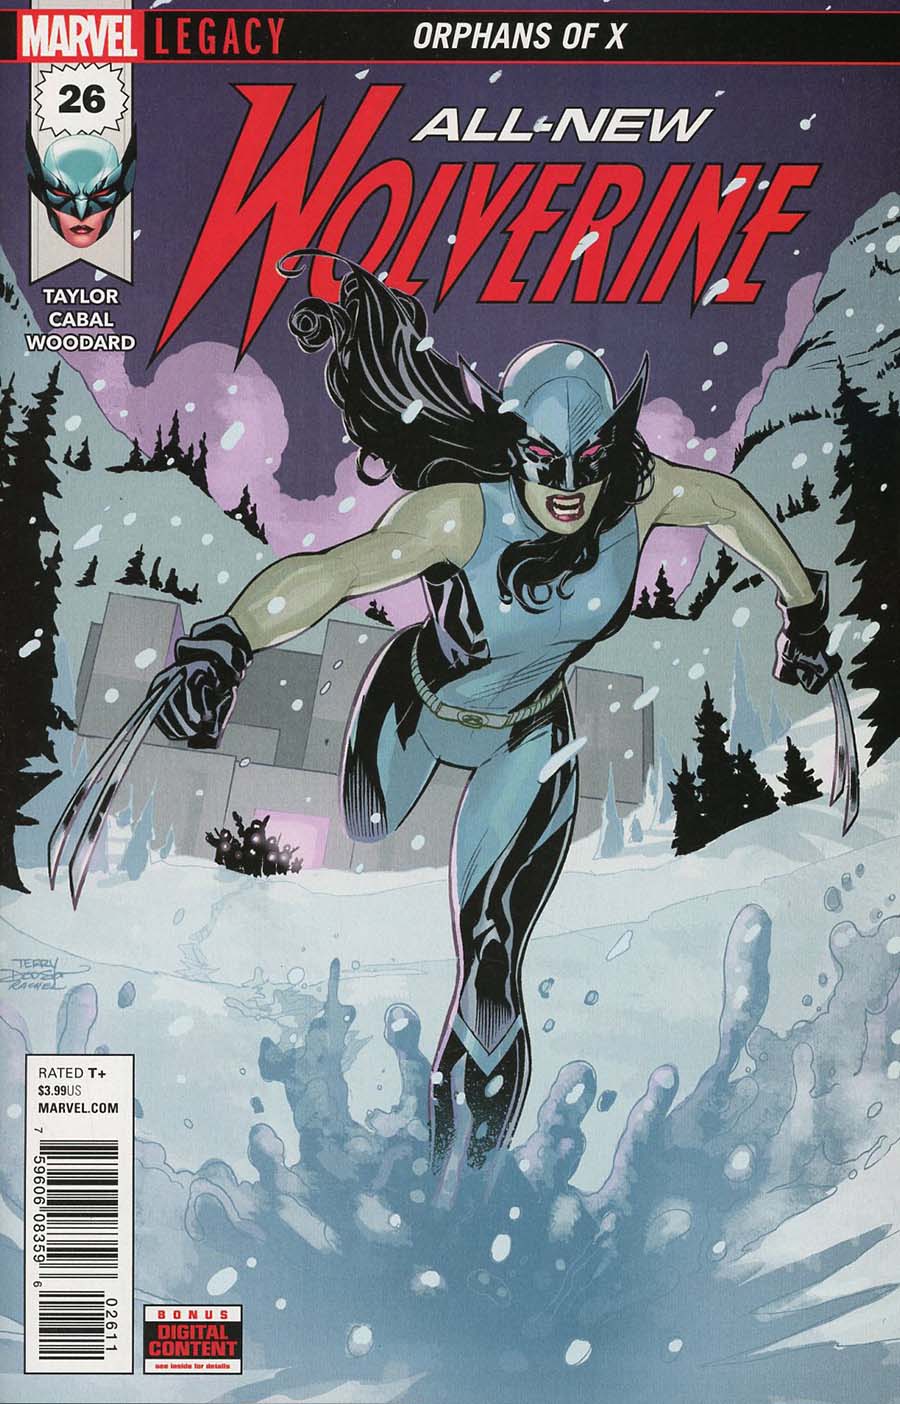 All-New Wolverine #26 (Marvel Legacy Tie-In)